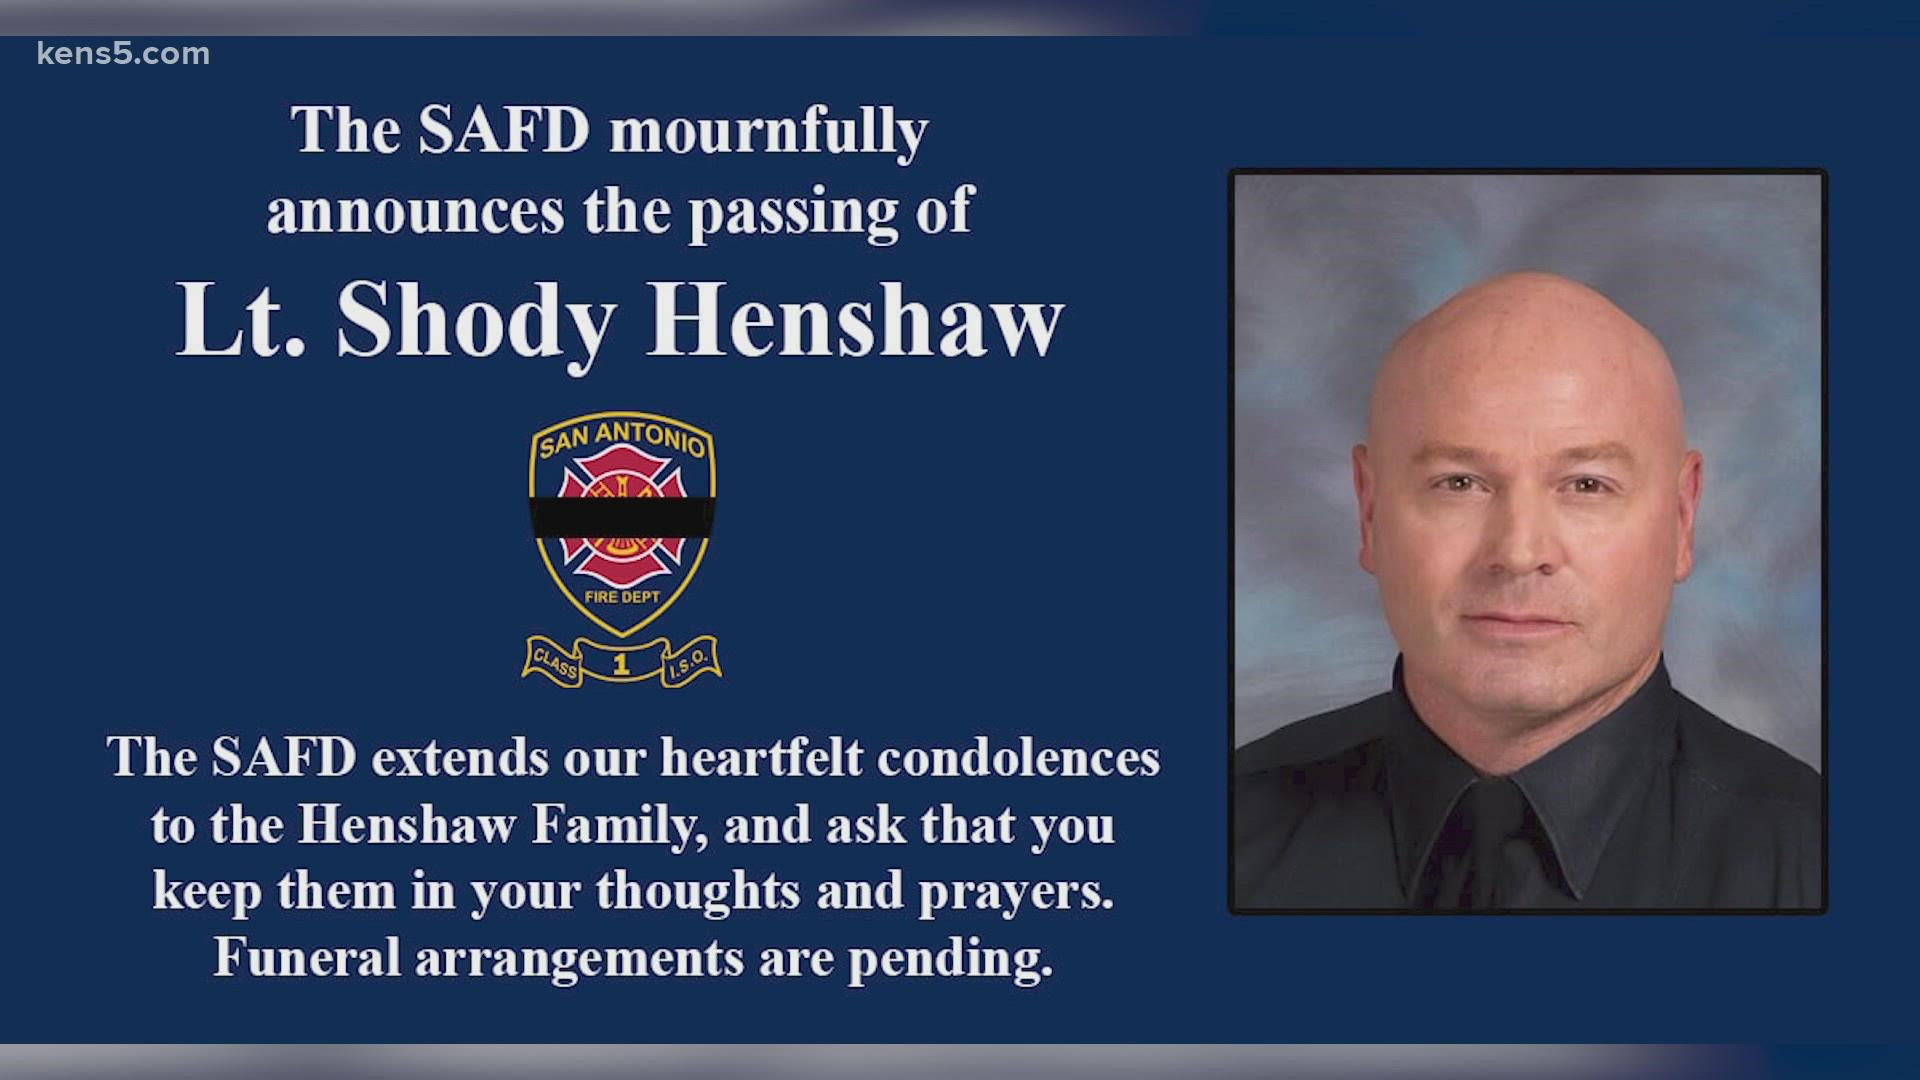 Henshaw entered the SAFD in 1998 and most recently served in the Training Division.